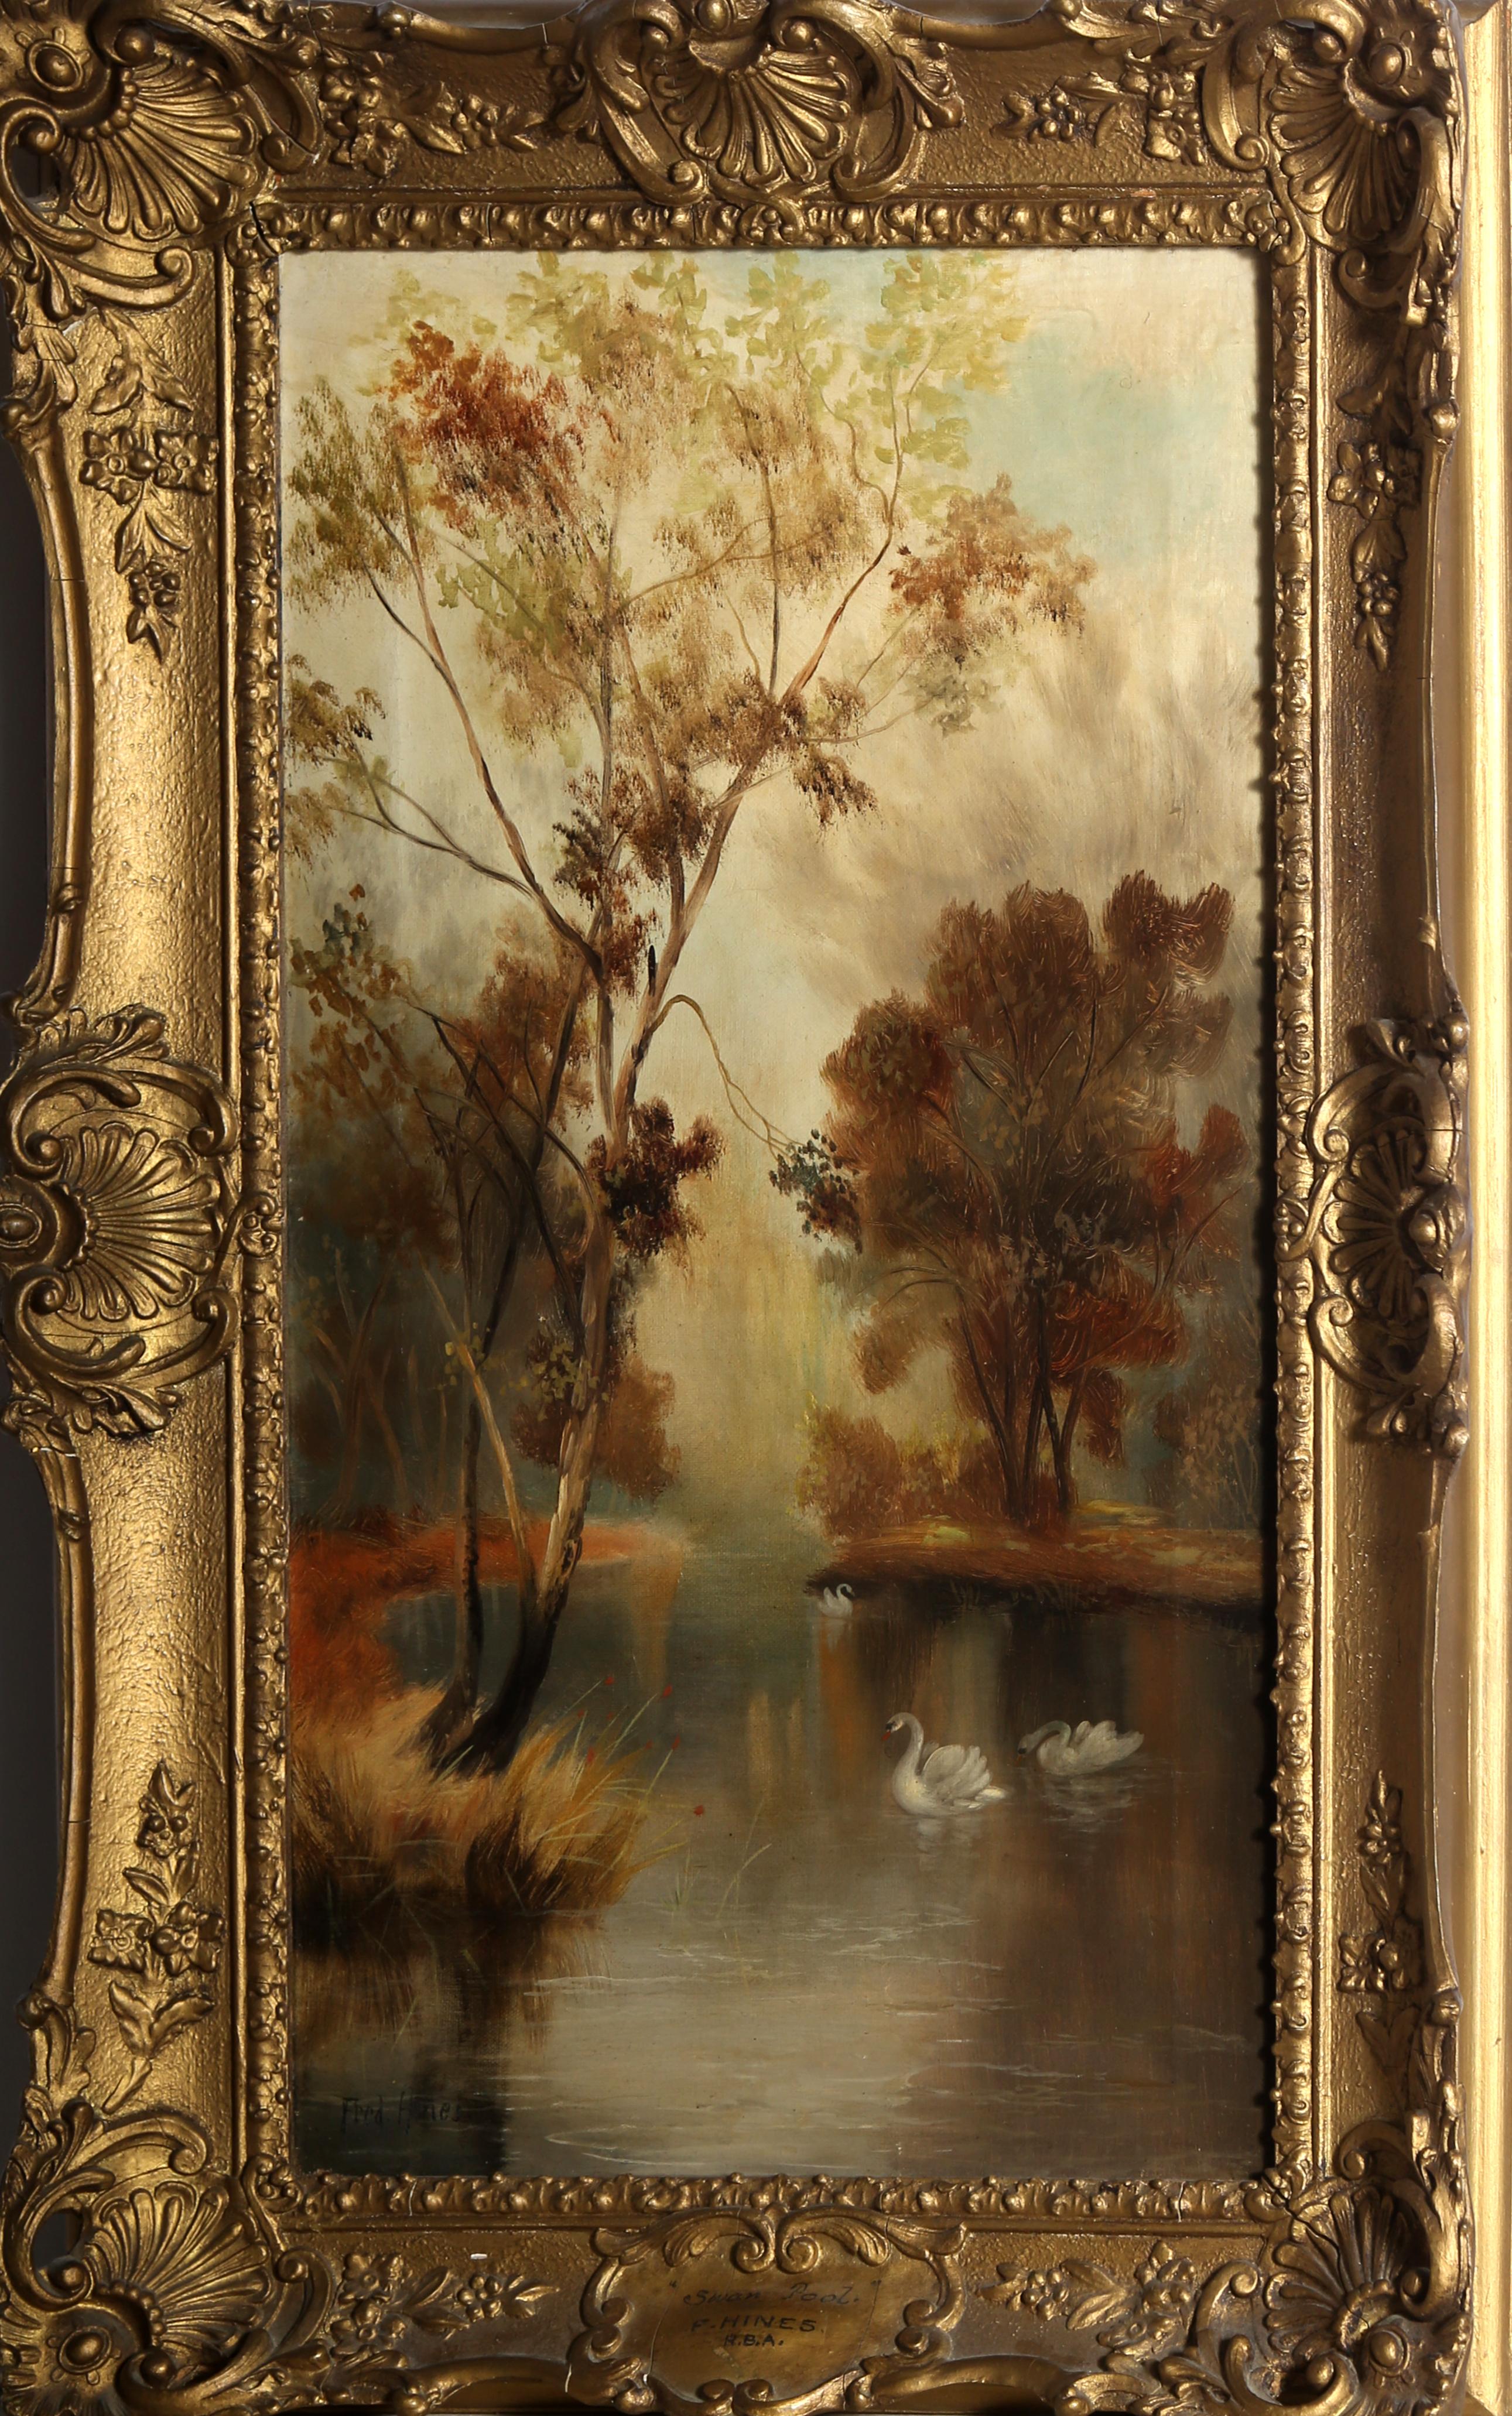 Swans, Victorian Era painting by Frederick Hines